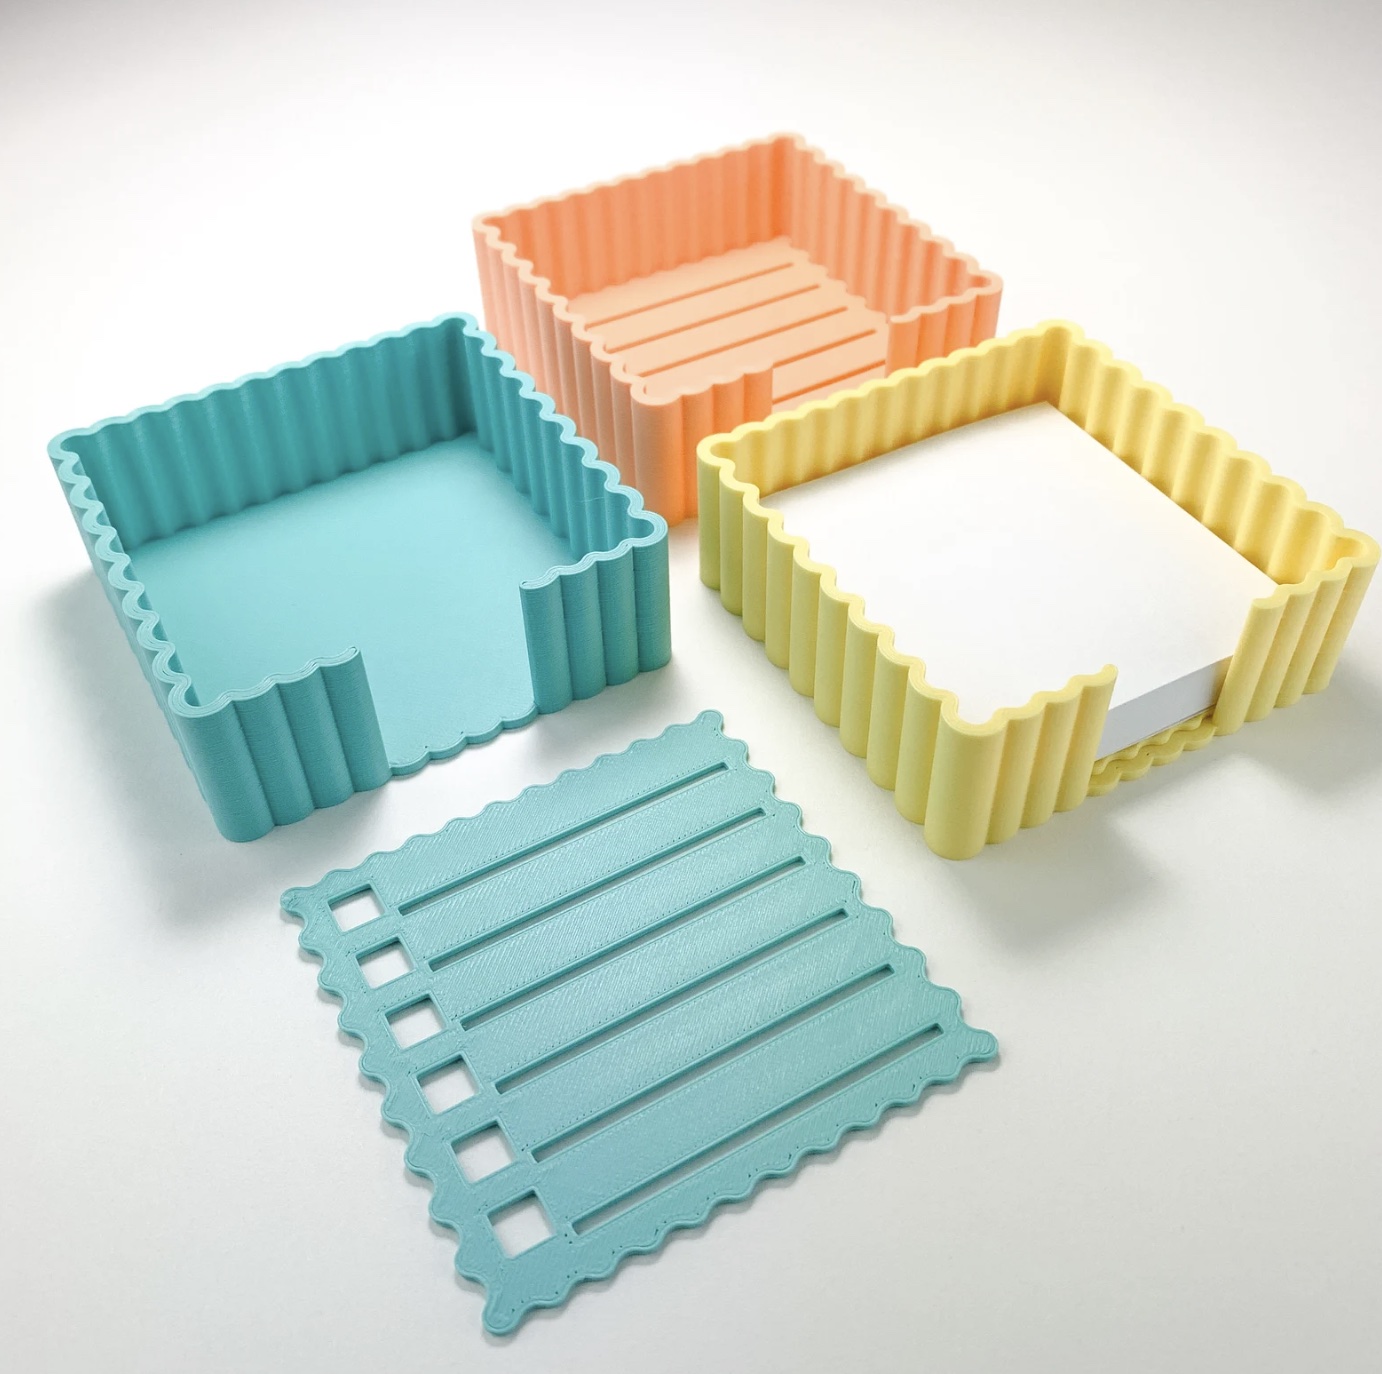 Etsy making money with a 3d printer sticky note holder